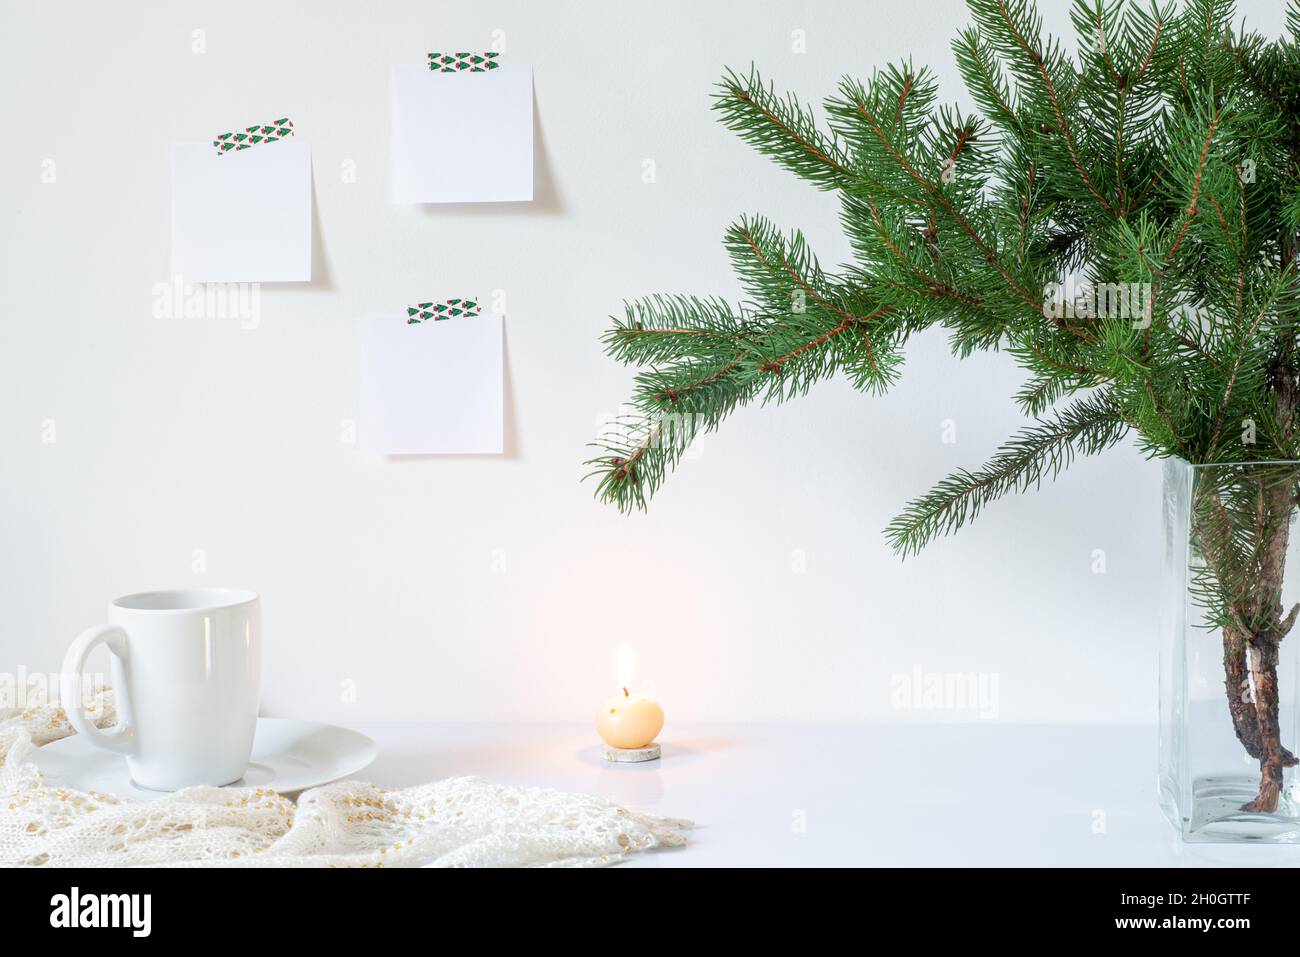 Festive breakfast still life.Cup of coffee, candle and vase with fir branches.Empty notepads mockup hanging on the white wall.Christmas decor.Working Stock Photo